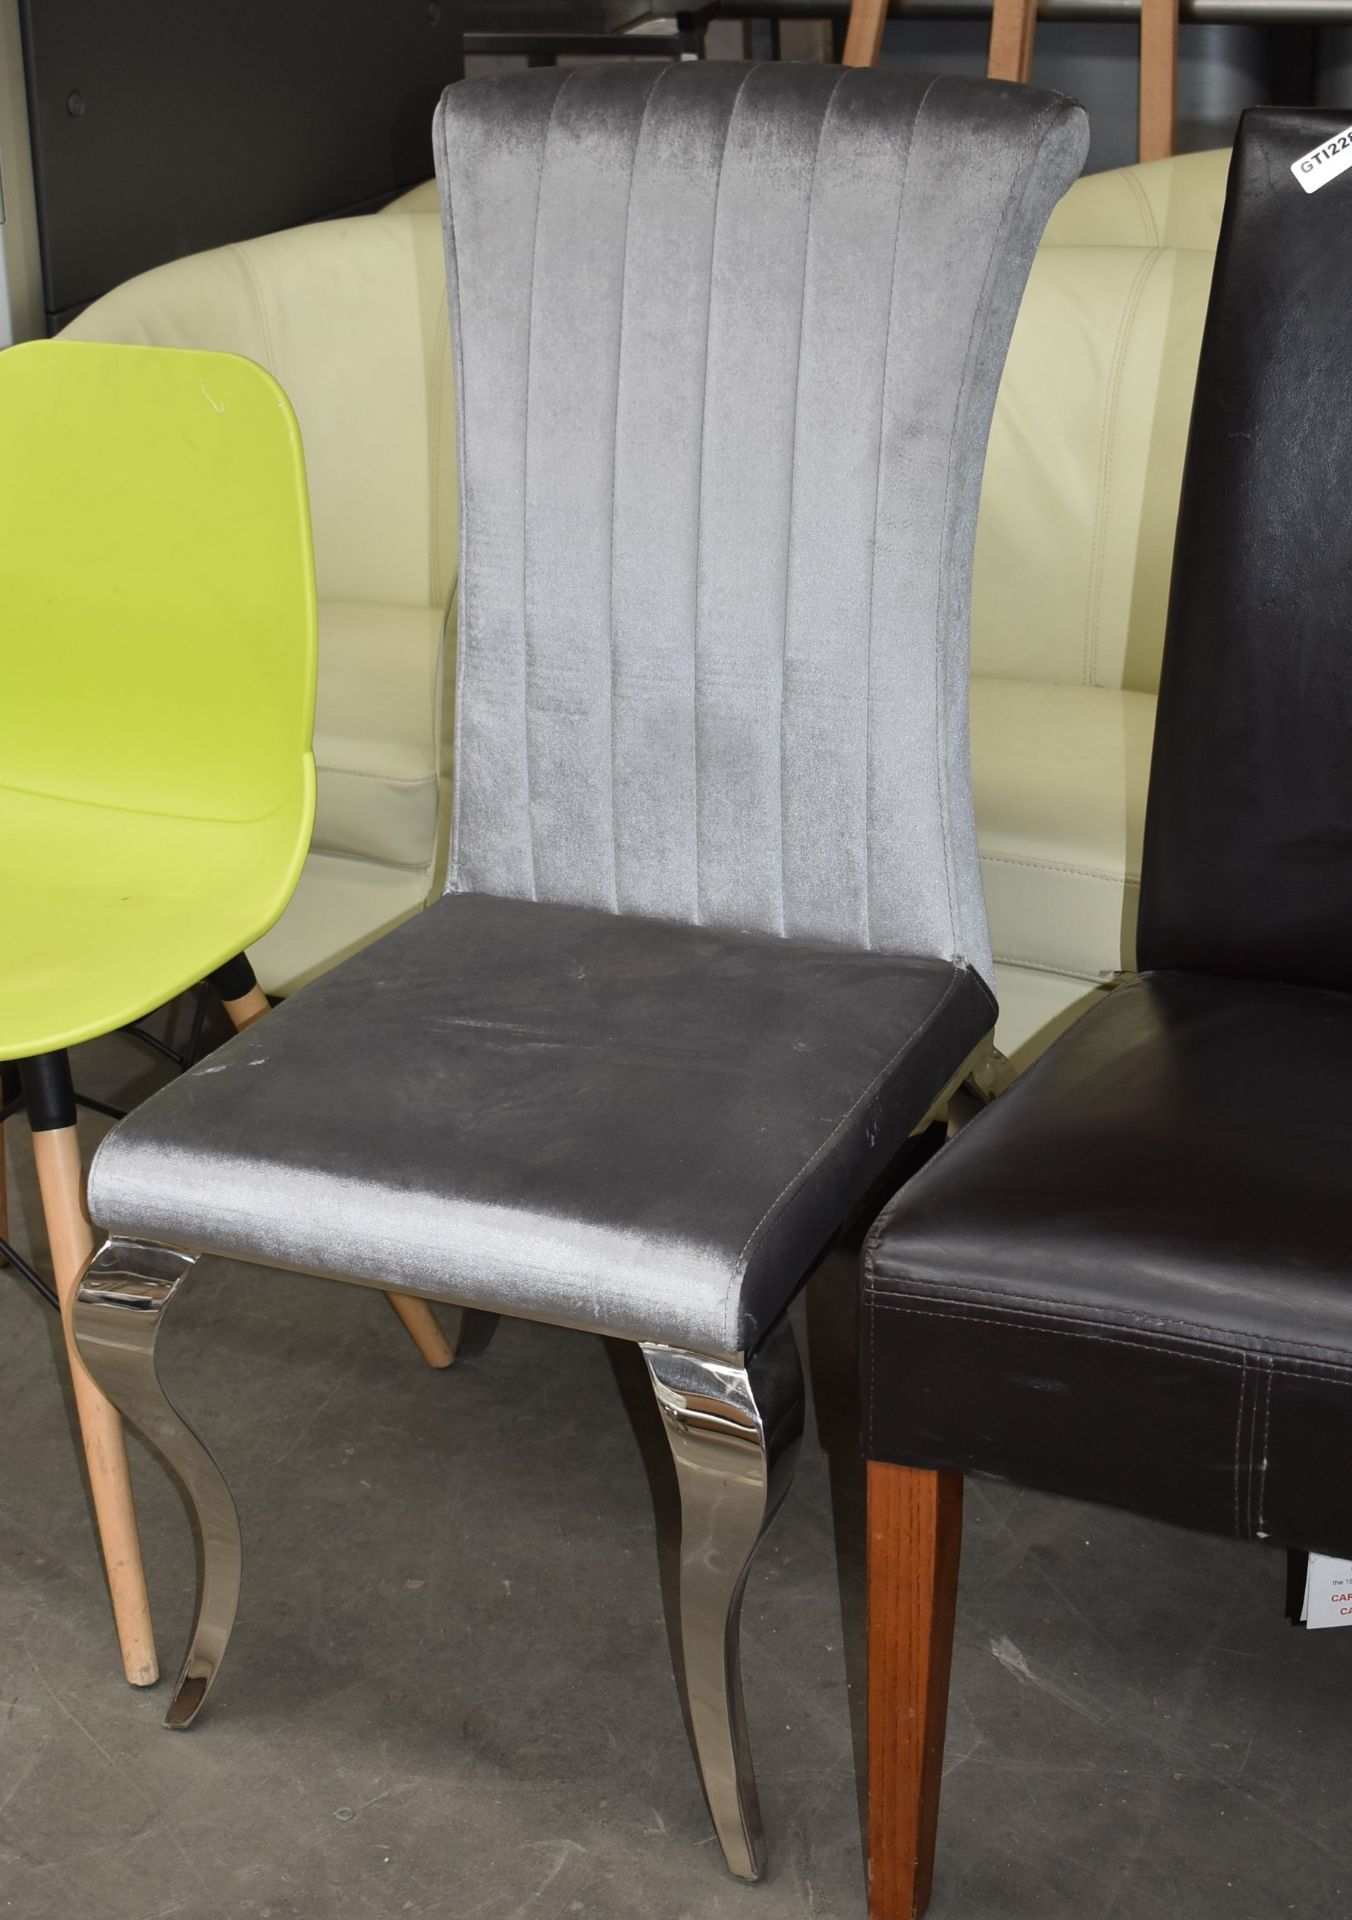 Job Lot Four Various Dining Chairs - CL011 - Ref GTI228 WH4 - Location: Altrincham WA14 - Image 4 of 4